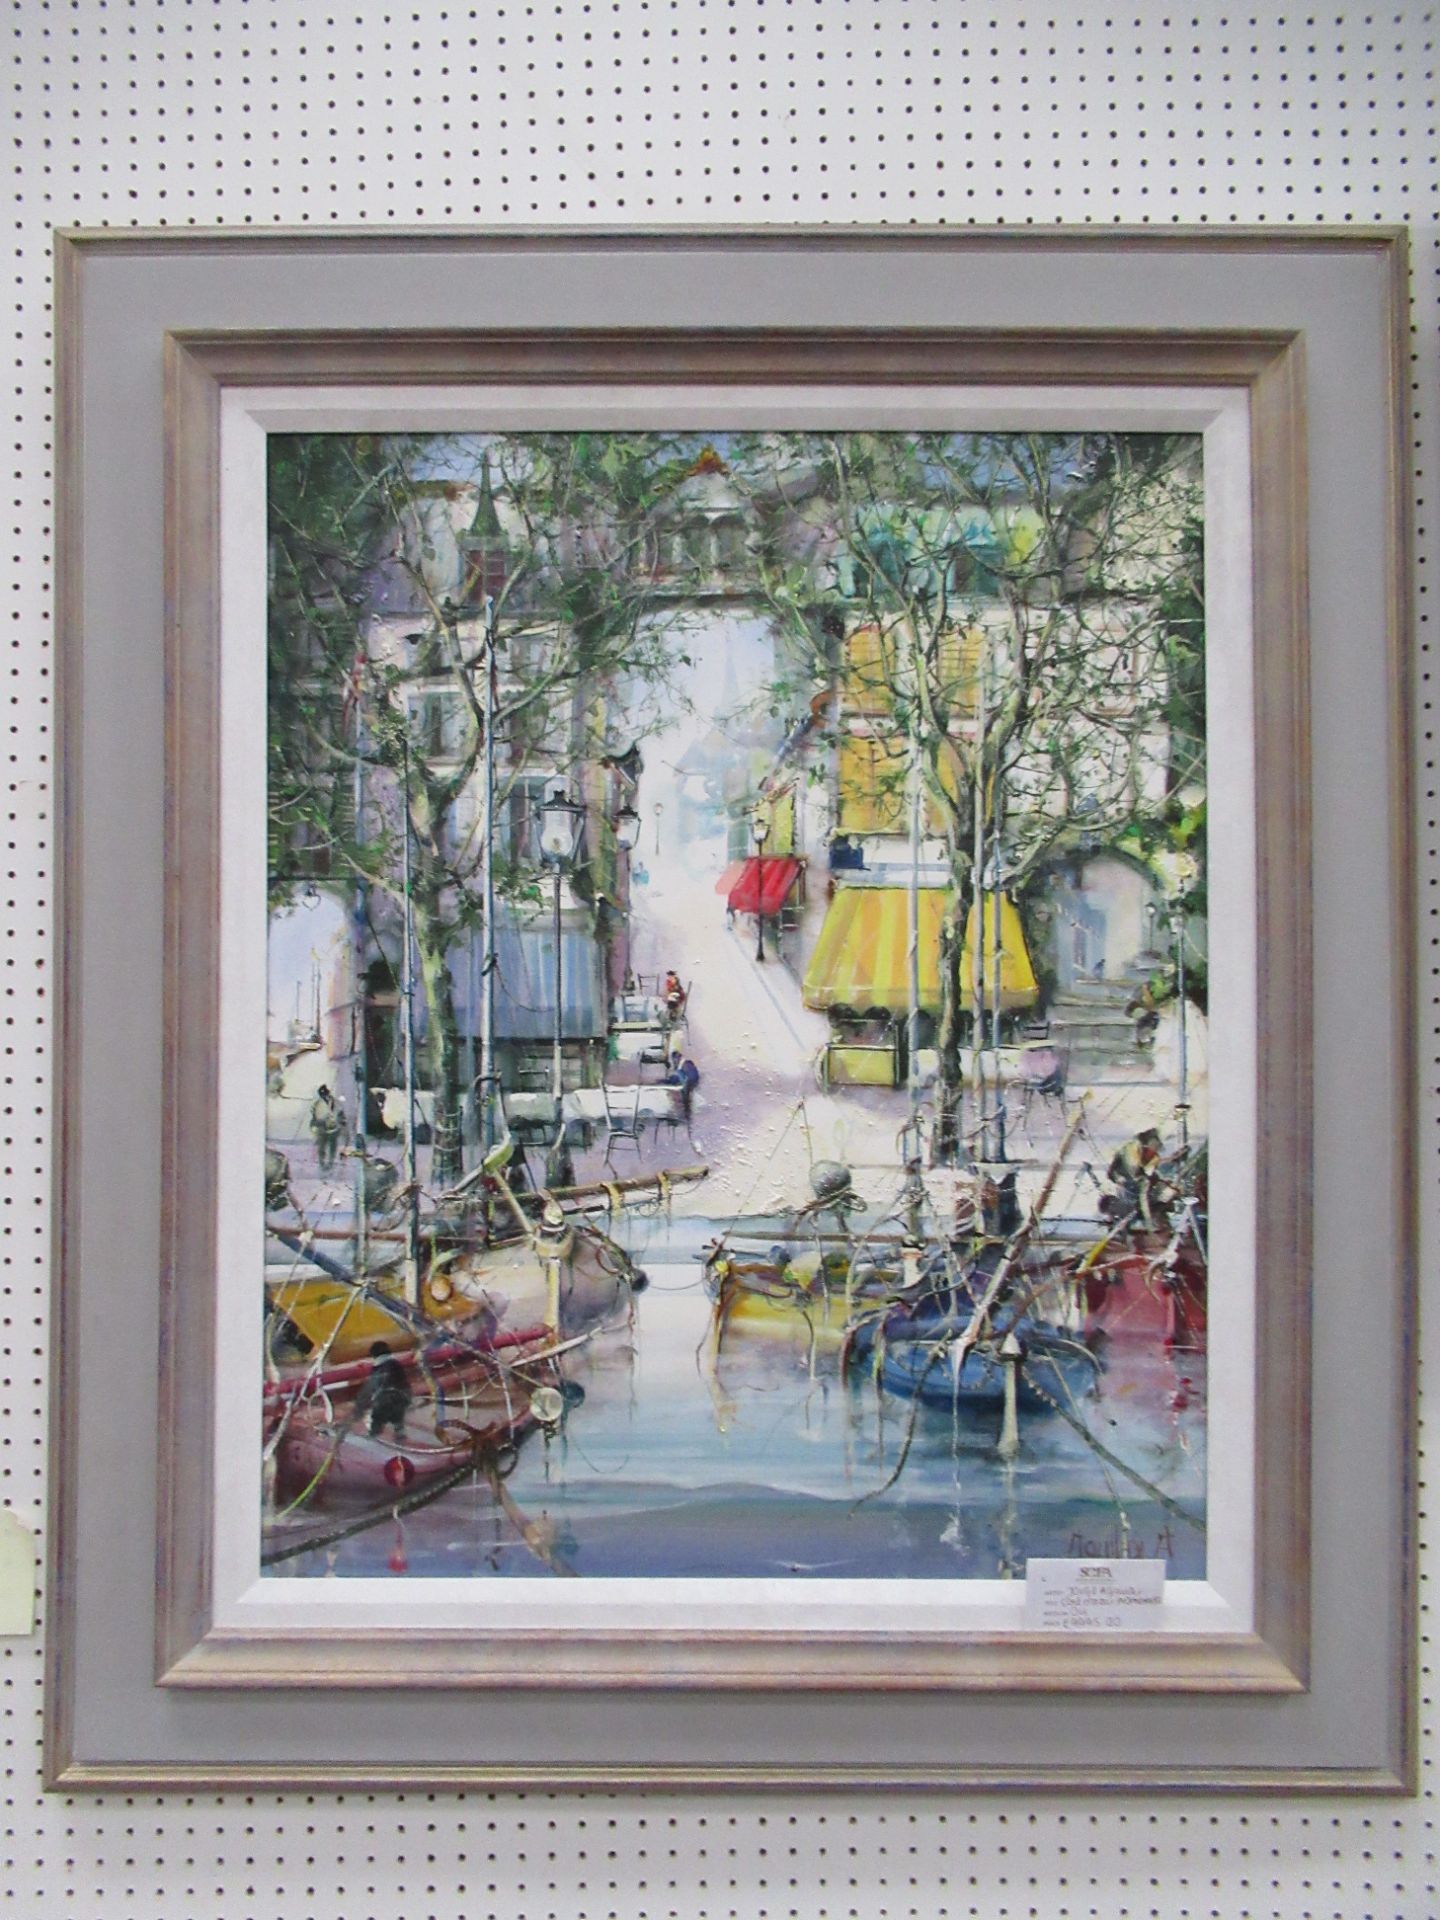 'Cote D'Azur Promenade' Oil Painting by Jorge Aguilar-Agon. RRP £9,995 (34" x 38" including frame) - Image 2 of 4